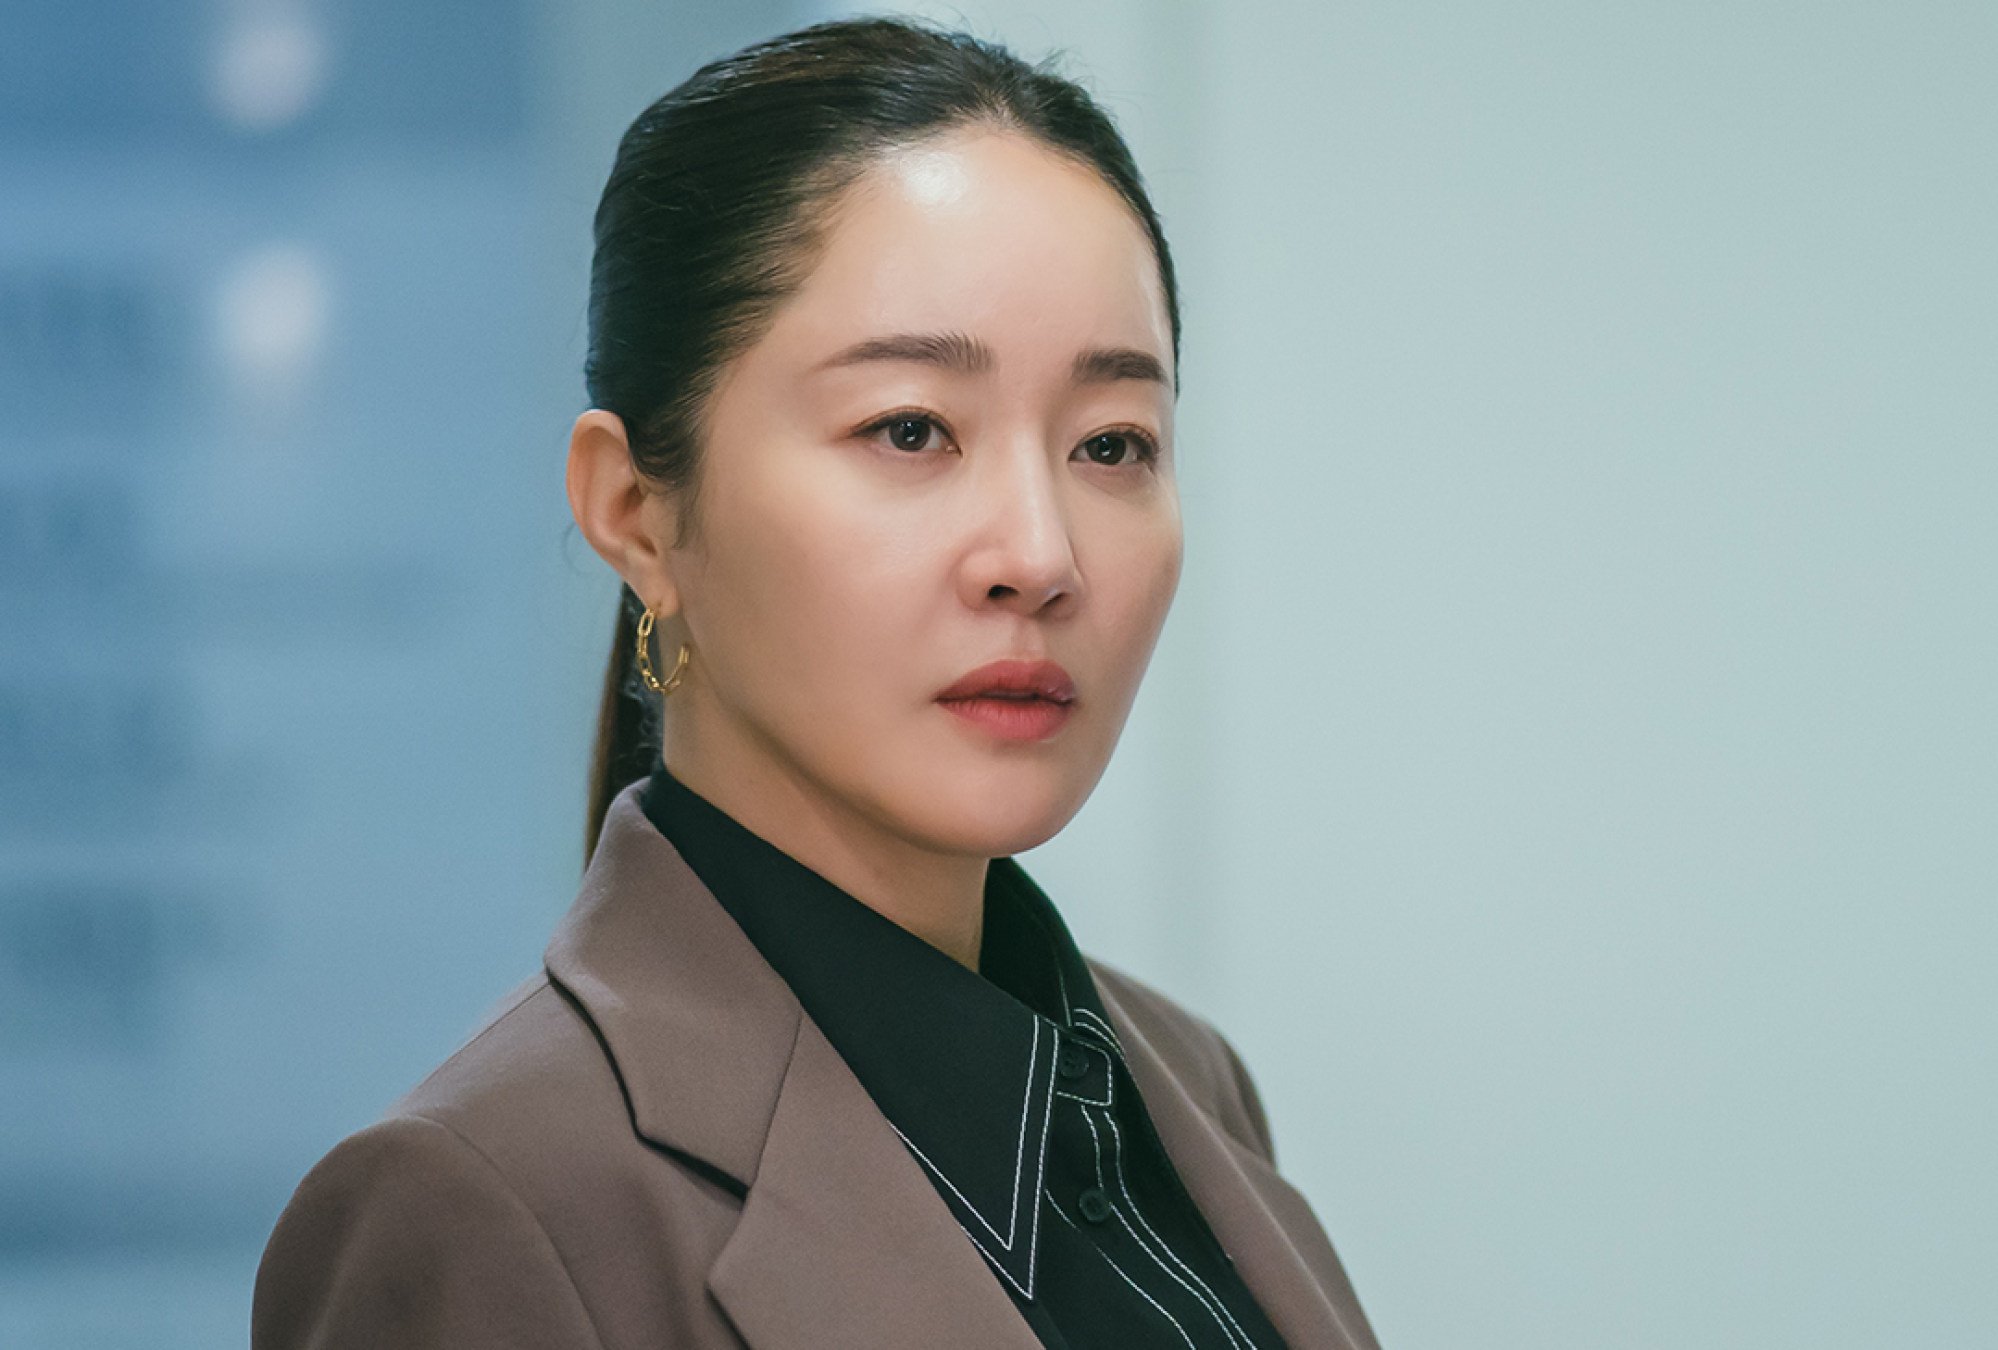 Uhm Ji Won Sex - K-drama Cold Blooded Intern: Ra Mi-ran, Uhm Ji-won tussle over maternity  leave in workplace comedy with social message | South China Morning Post